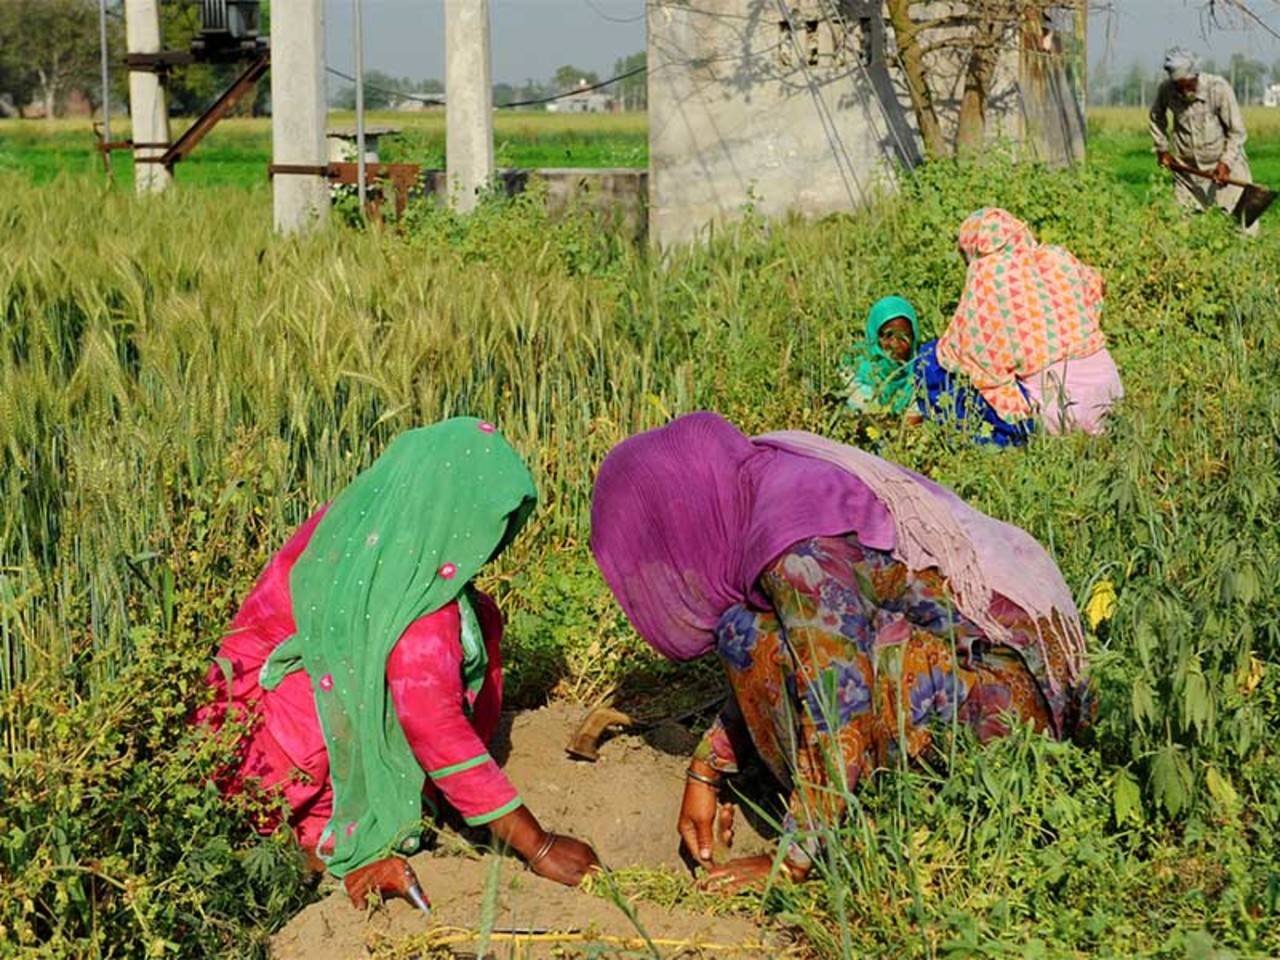 Dalit women labourers in Punjab farms battle sex abuse India News